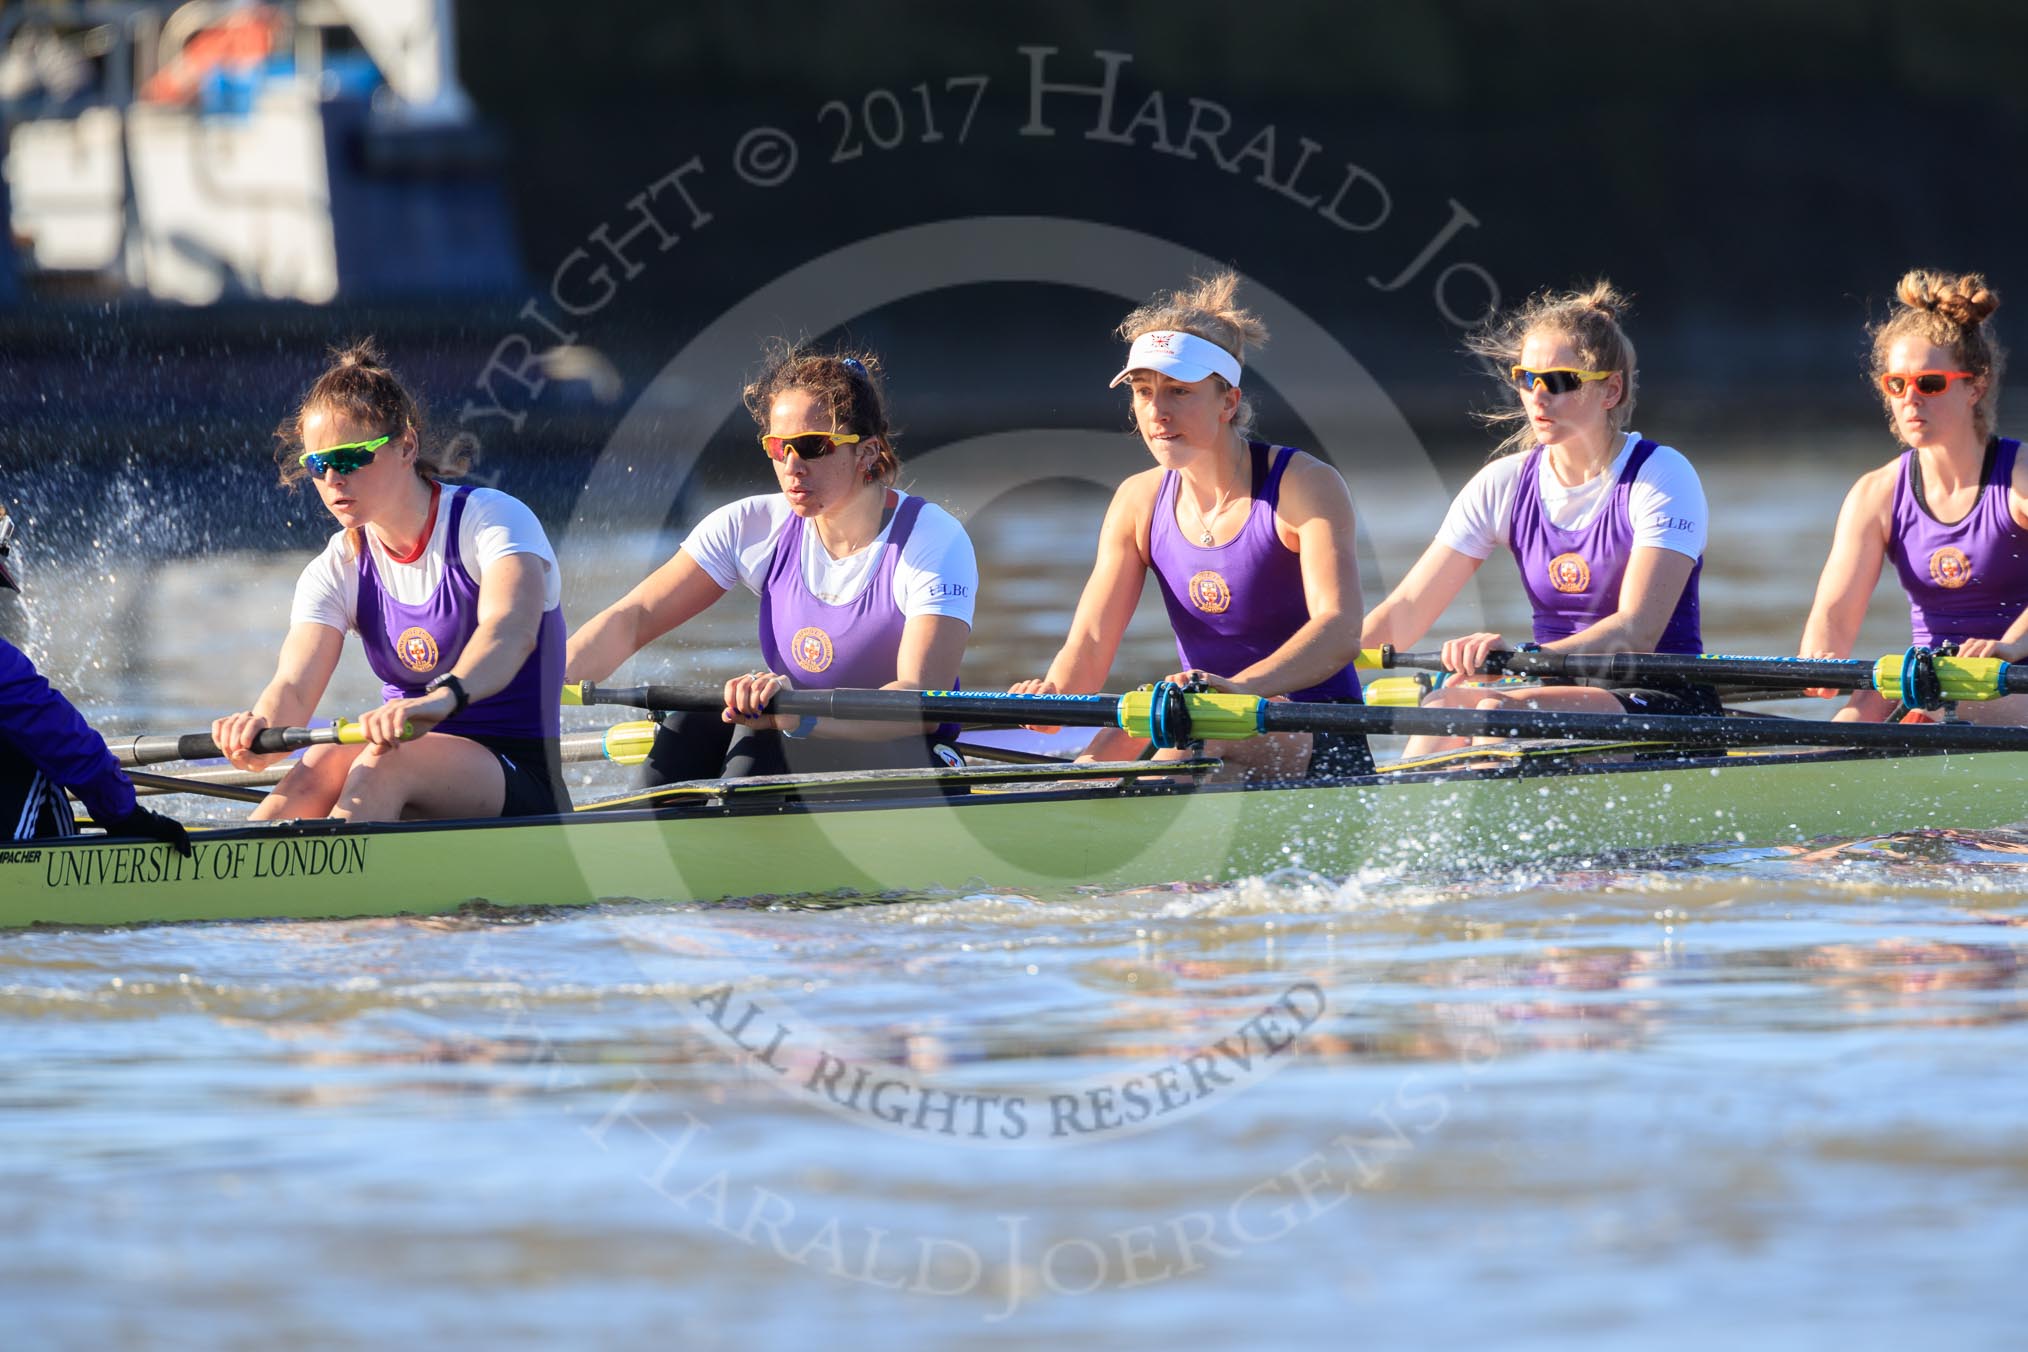 The Women's Boat Race season 2018 - fixture CUWBC vs. ULBC: The race has been started - ULBC with cox Lauren Holland, stroke Issy Powel, 7 Jordan Cole-Huissan, 6 Oonagh Cousins, 5 Hannah Roberts, 4 Katherine Barnhill.
River Thames between Putney Bridge and Mortlake,
London SW15,

United Kingdom,
on 17 February 2018 at 13:09, image #41